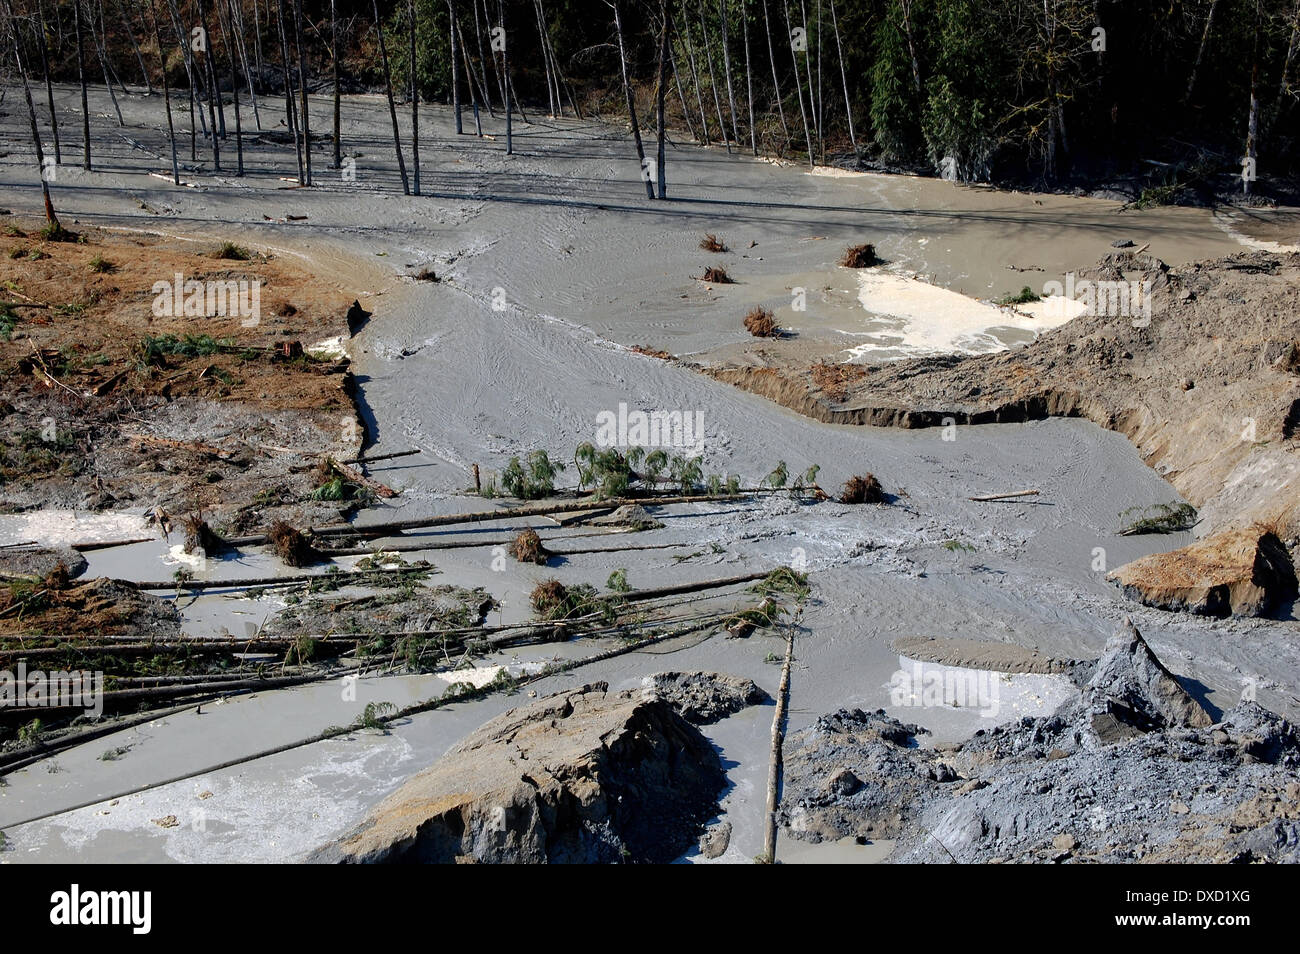 Aerial view of the breach through the landslide where water from the Stillaguamish River buried State Route 530 and causing a massive mudslide killing at least eight people and destroying a small riverside village in northwestern Washington state March 22, 2014 in Oso, Washington. Stock Photo